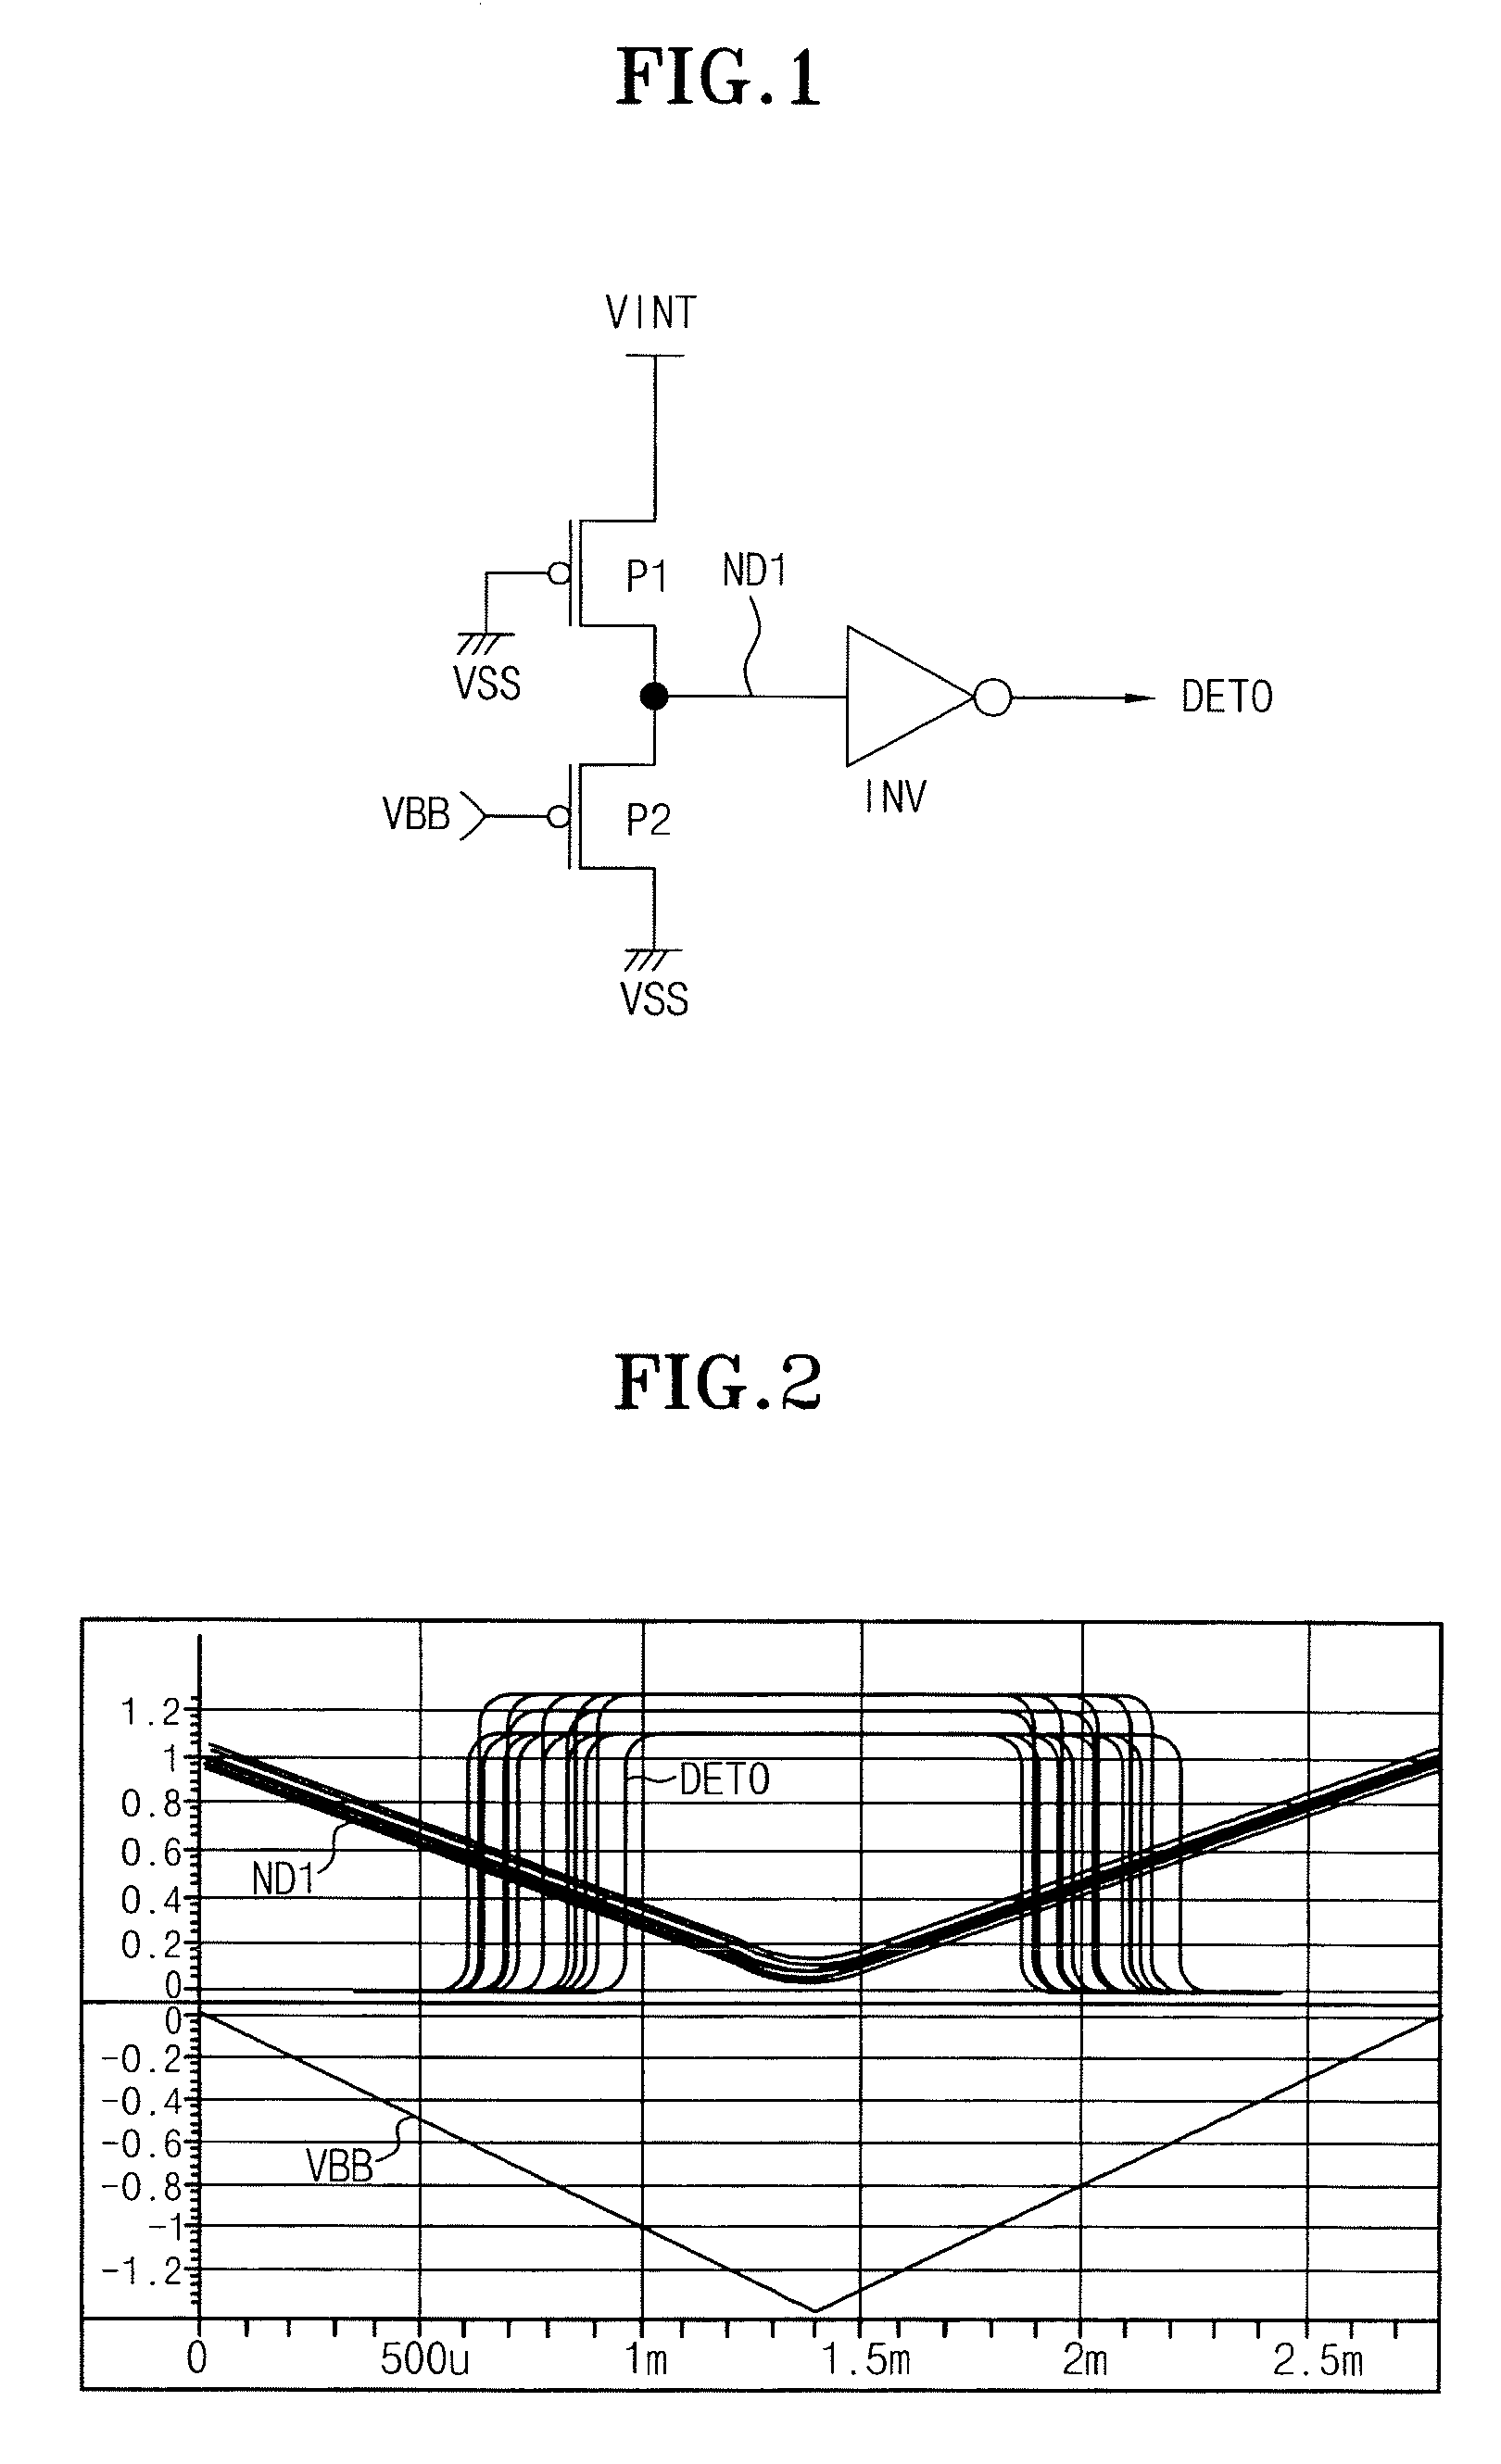 Internal voltage generation circuit for generating stable internal voltages withstanding varying external conditions